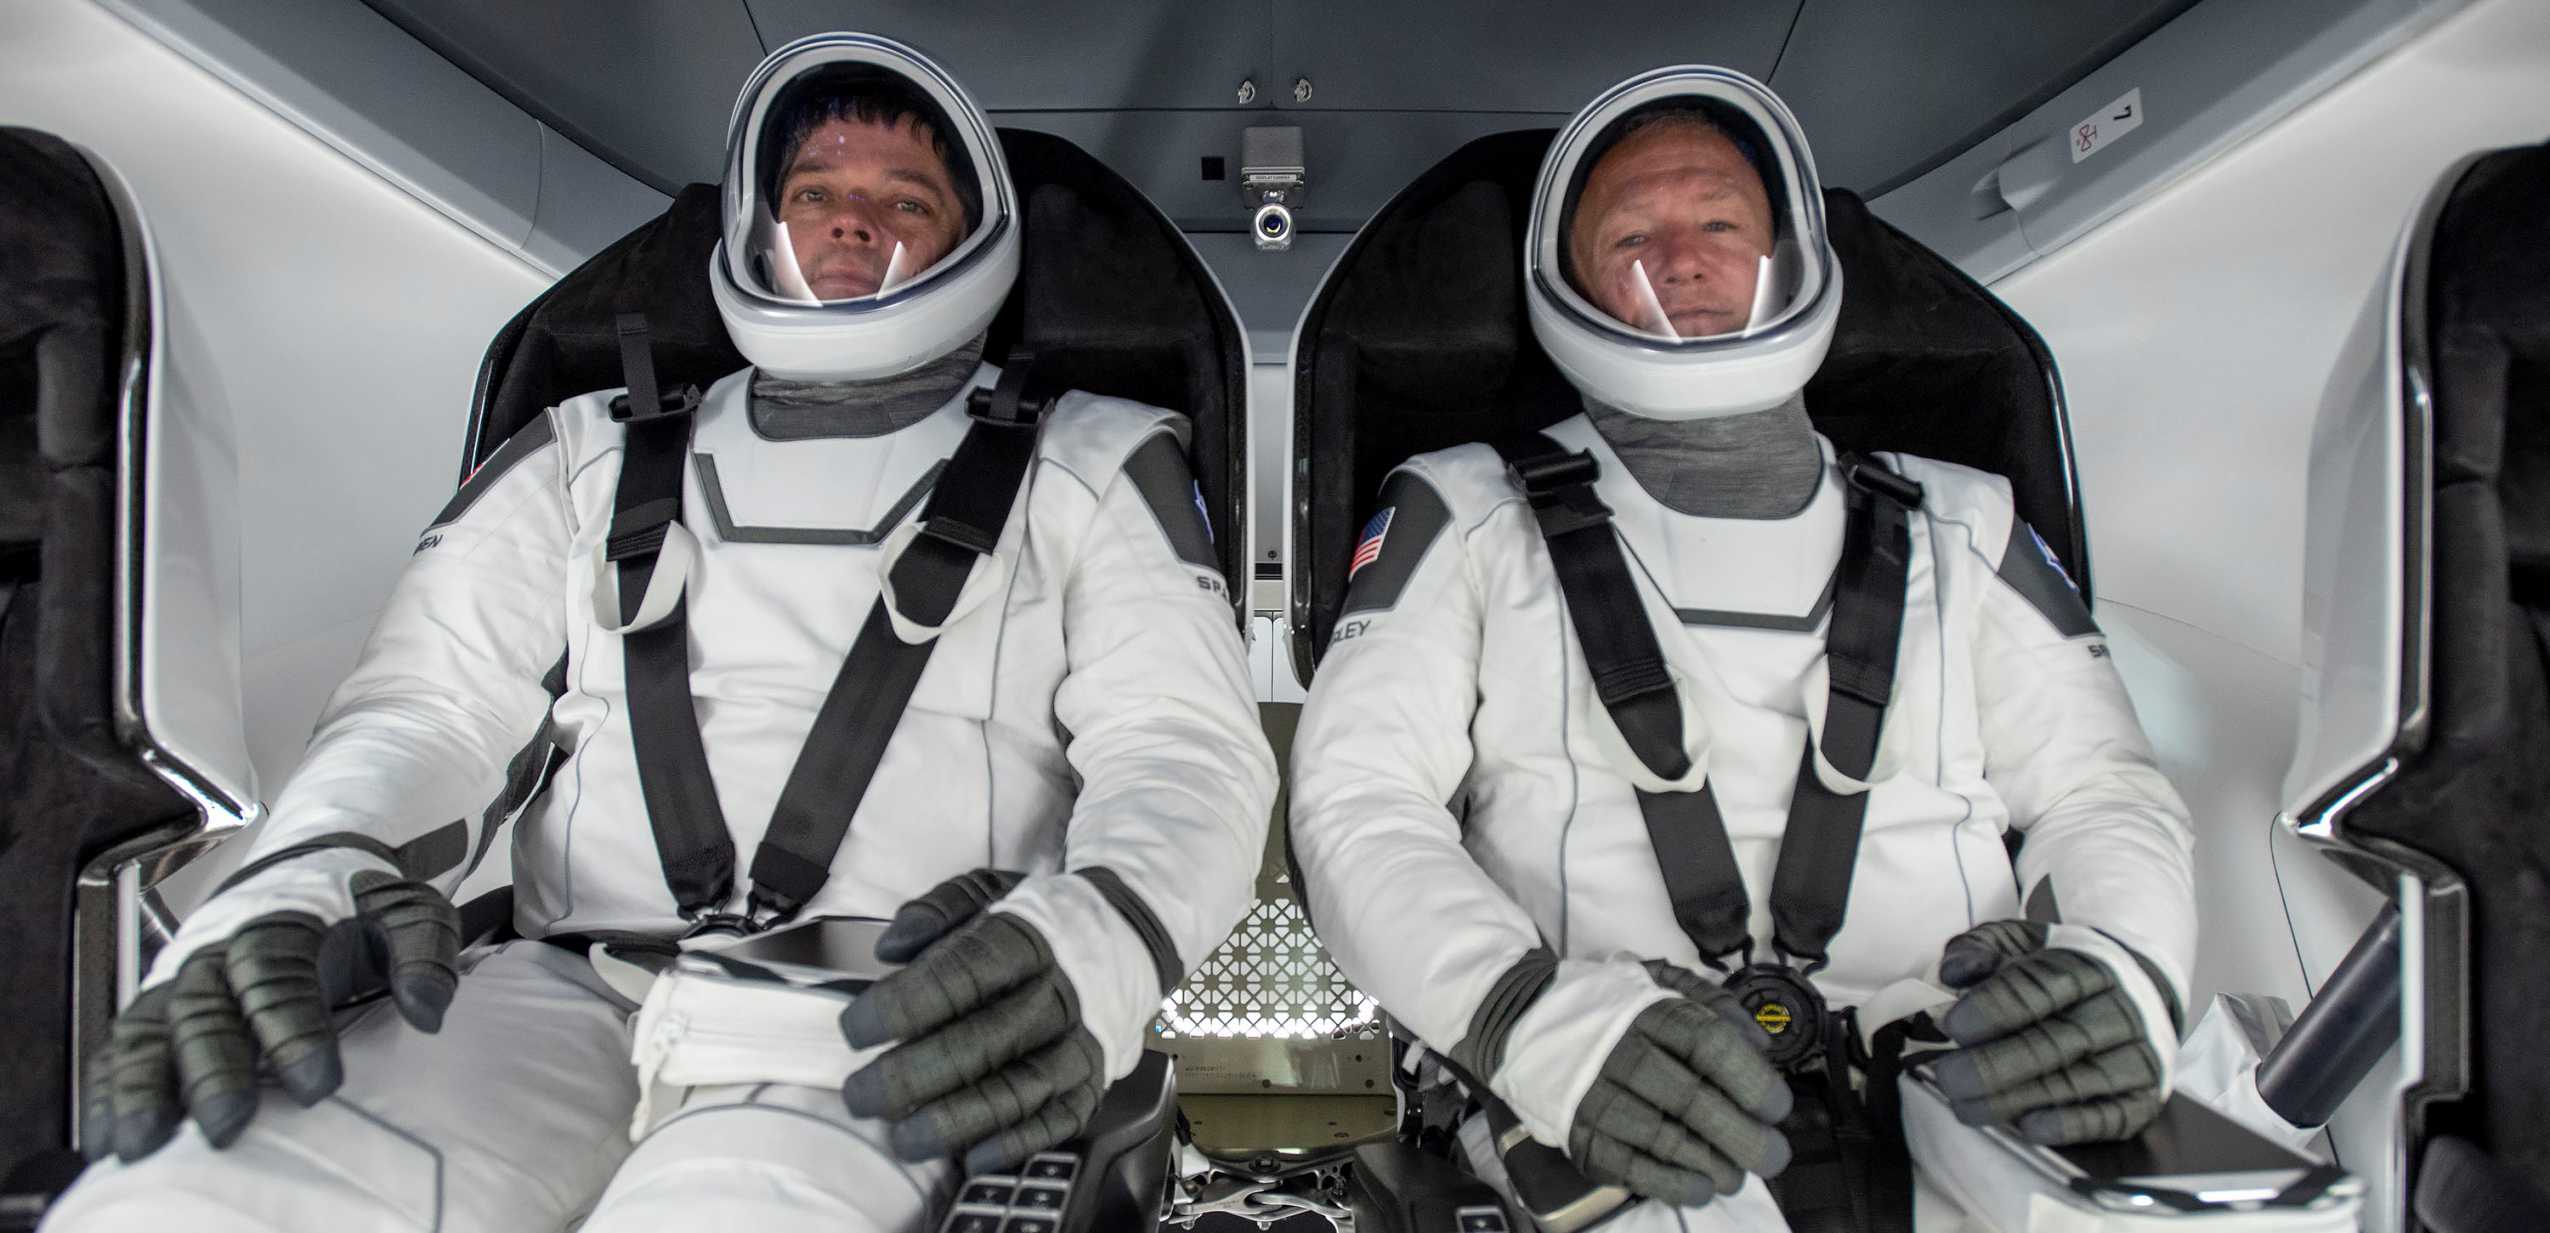 SpaceX is preparing to launch NASA astronauts for the first time -Take a look inside Crew Dragon!